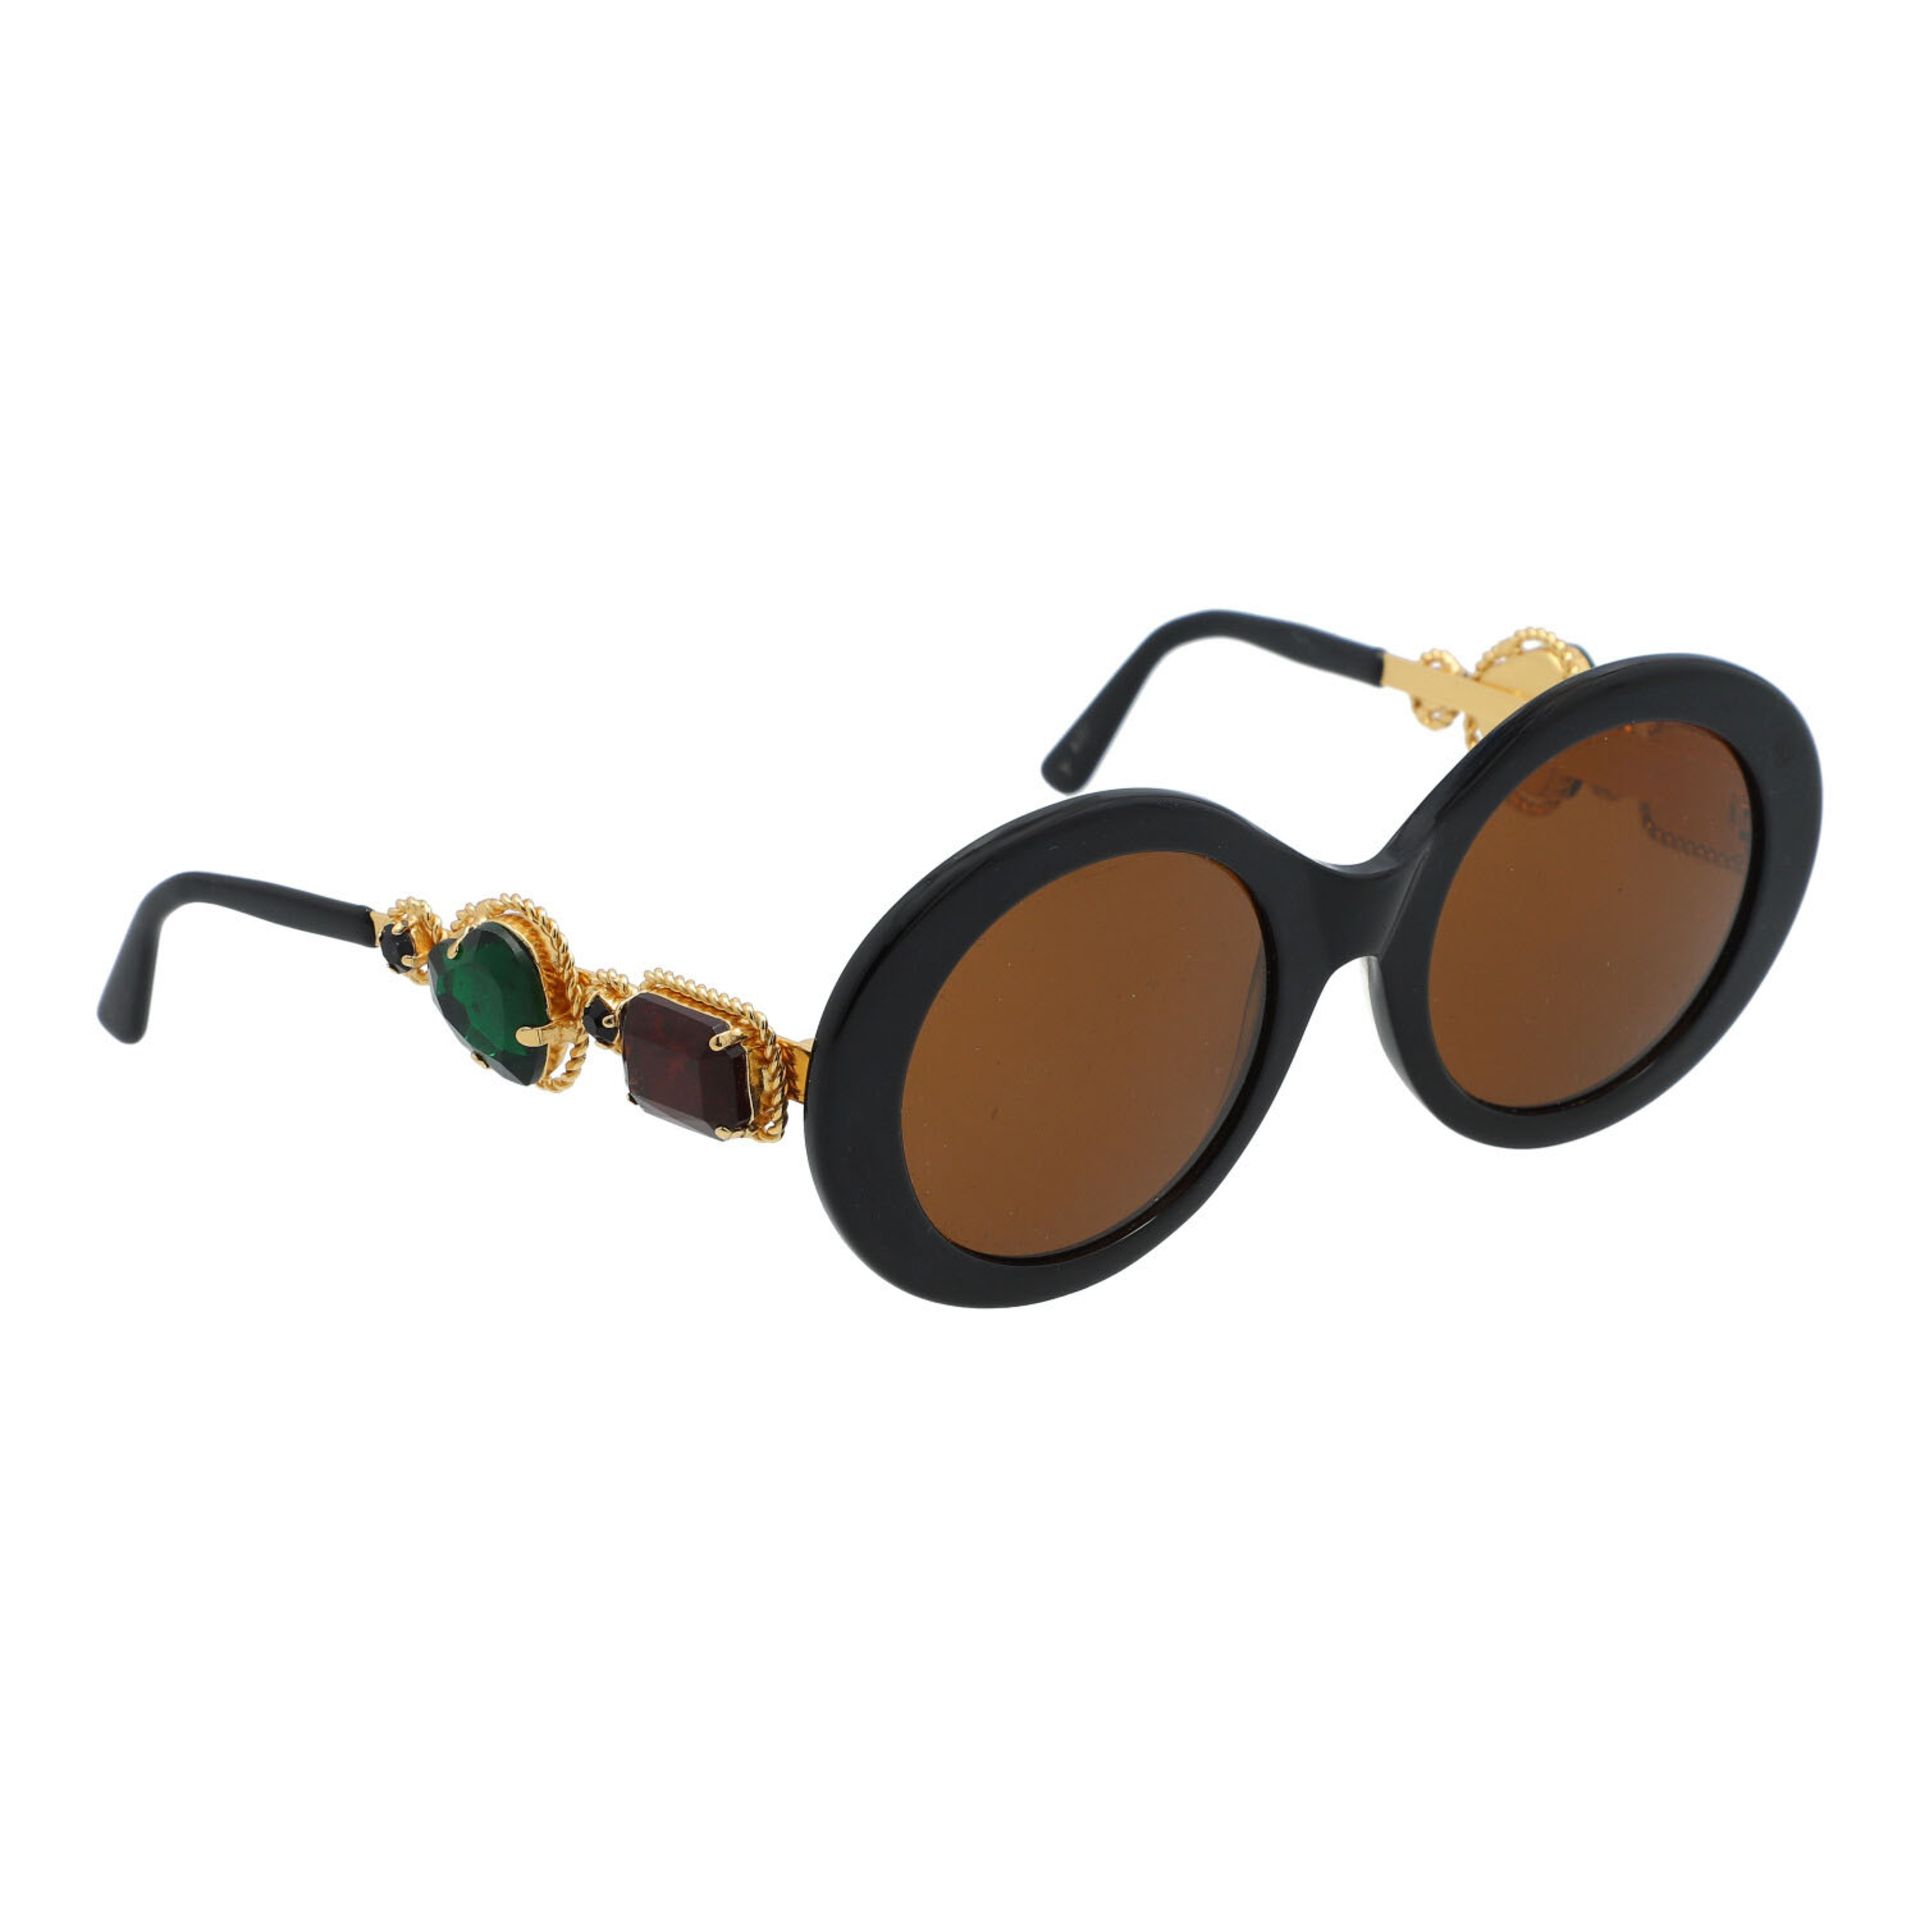 MOSCHINO BY PERSOL VINTAGE Sonnenbrille "M253 - LADY GAGA", Koll.: 1989. - Image 2 of 6